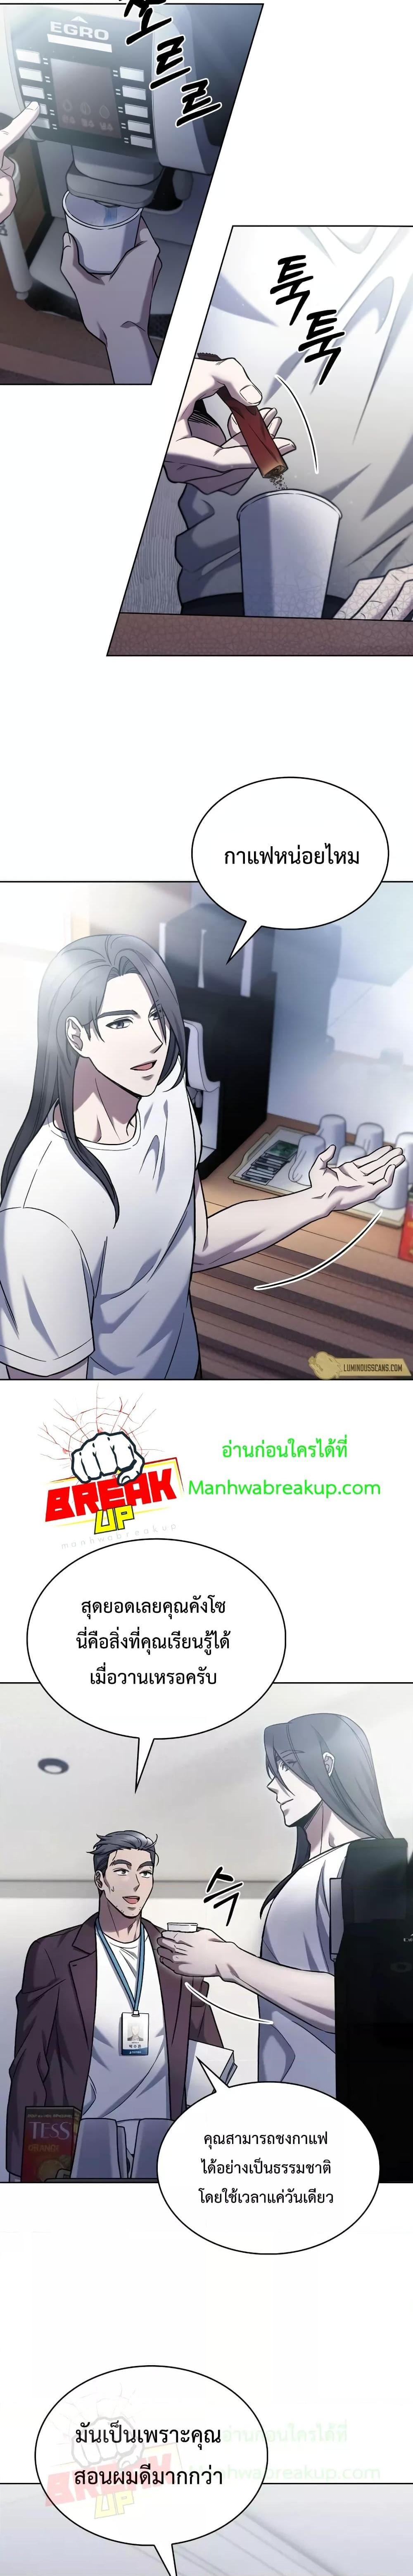 The Delivery Man From Murim ตอนที่ 7 (18)